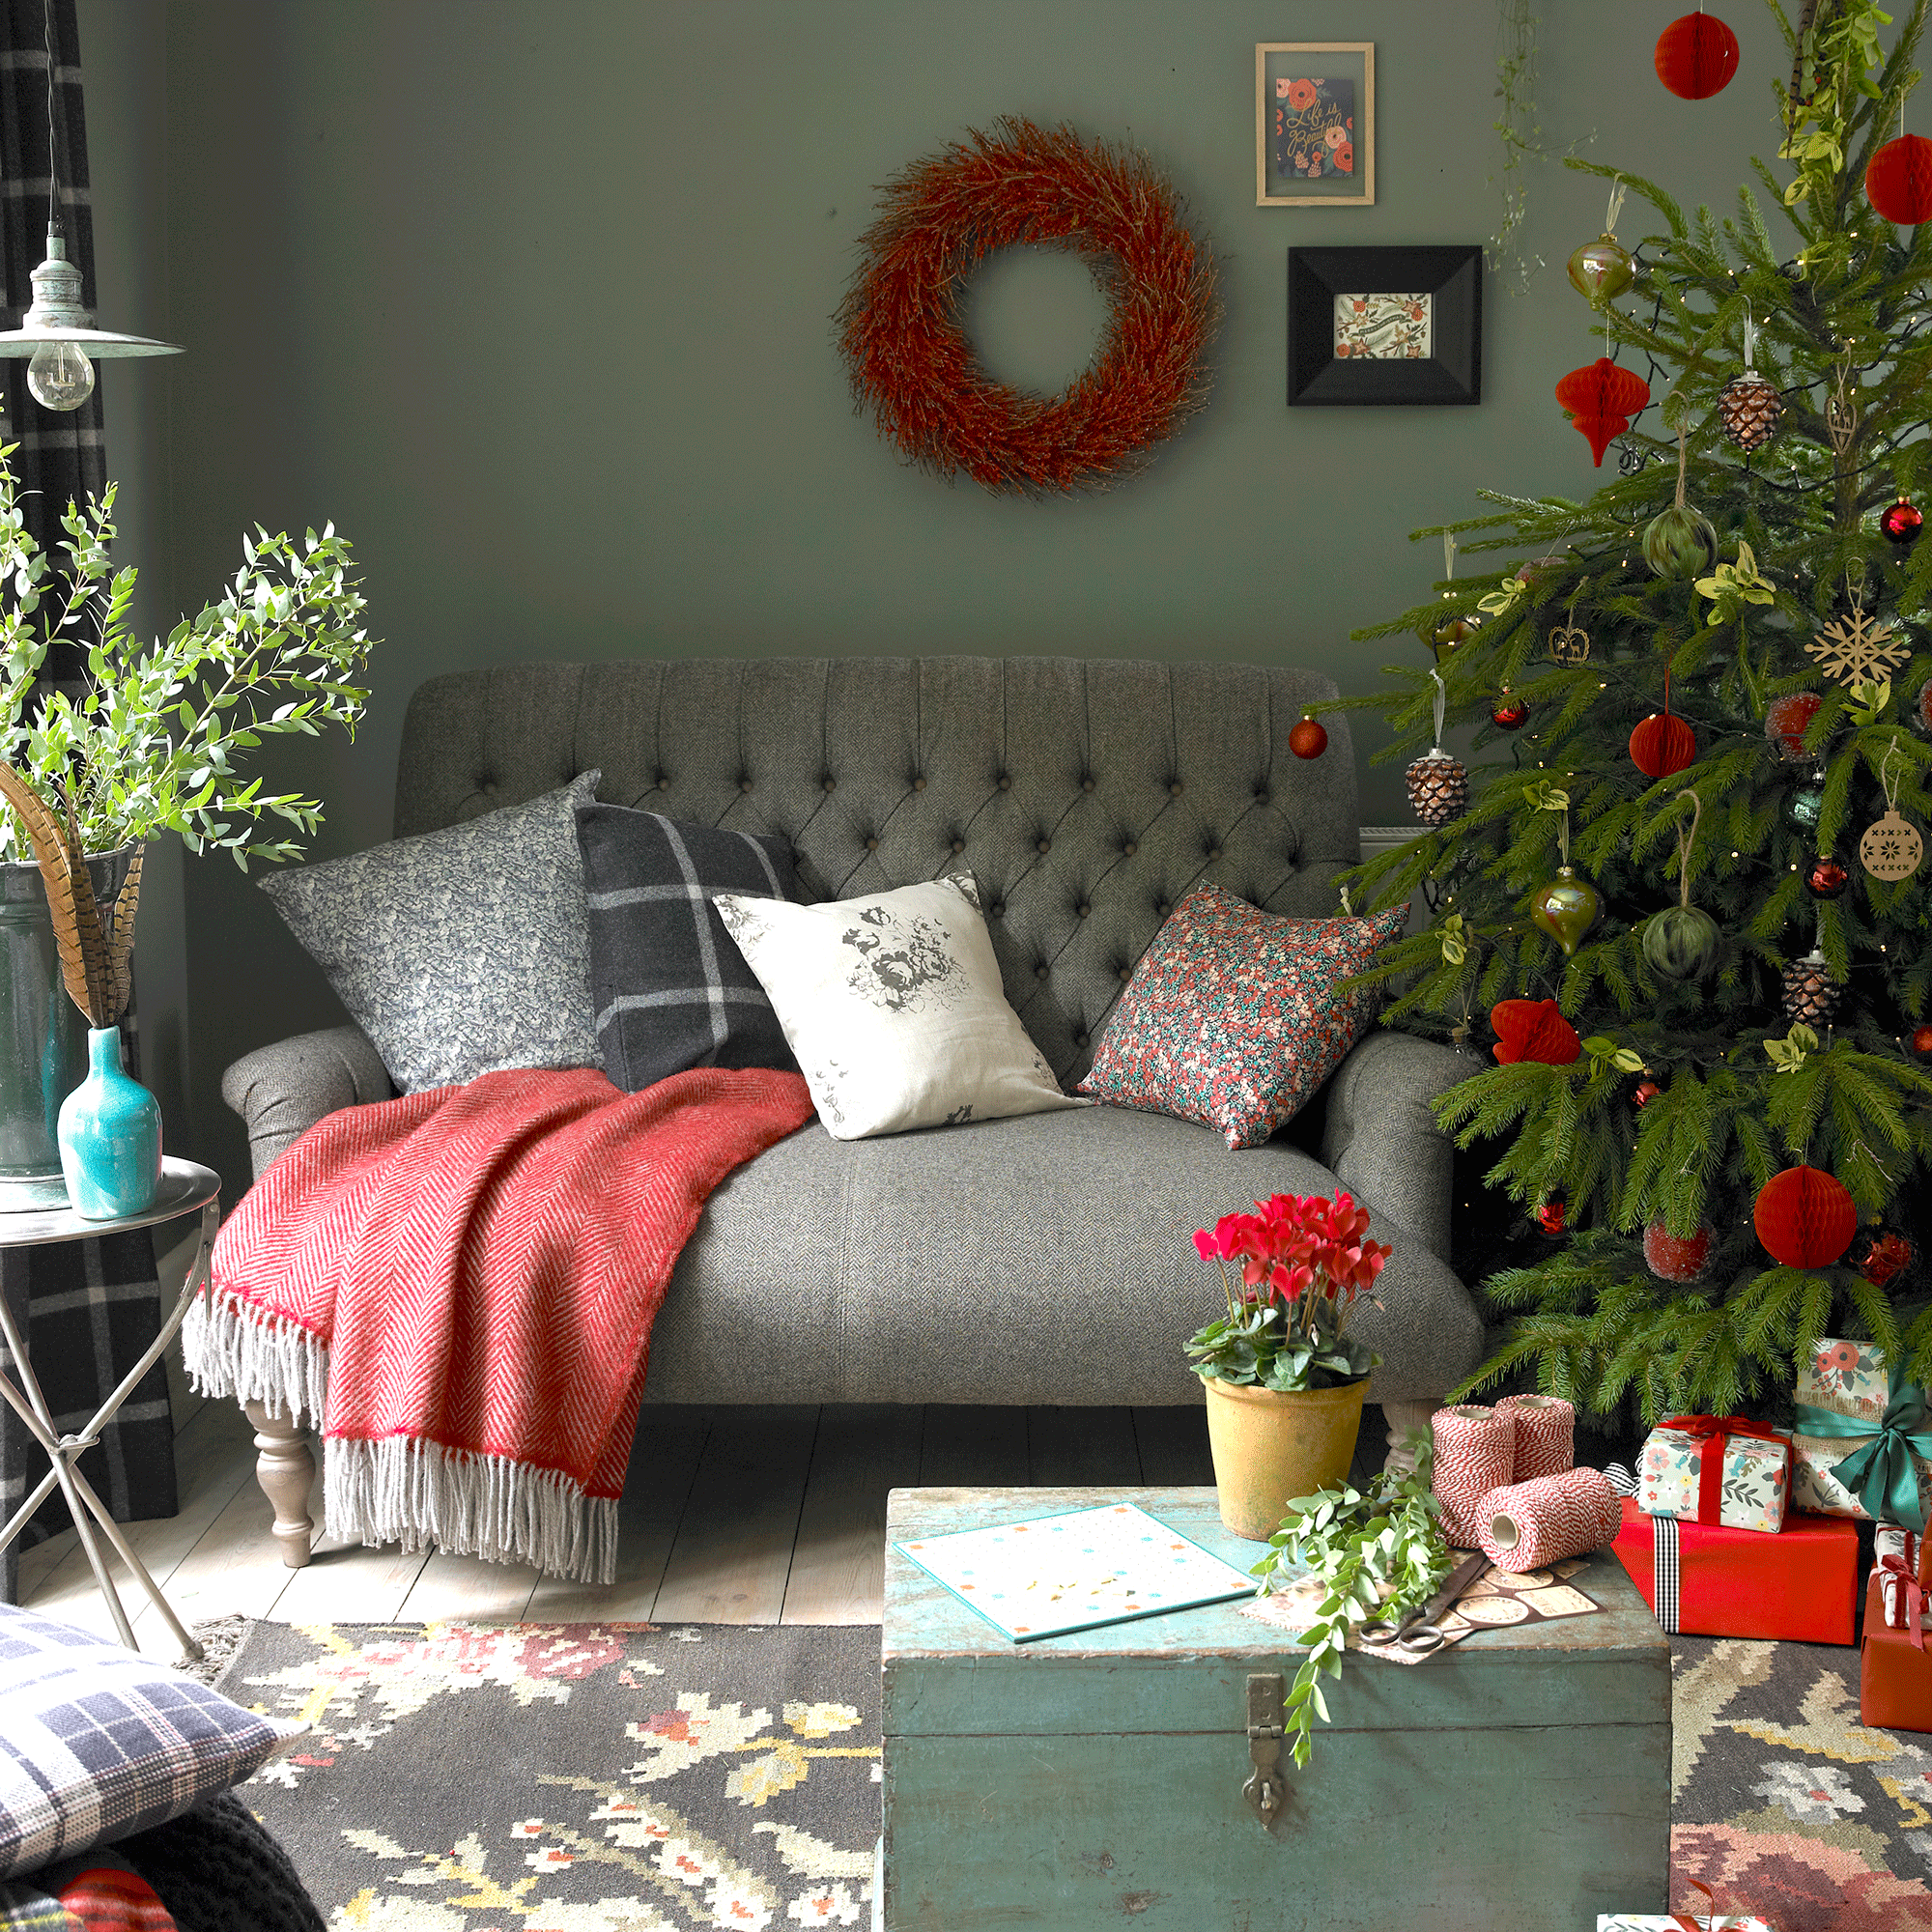 10 style-savvy ways to decorate a small living room for Christmas, according to design experts